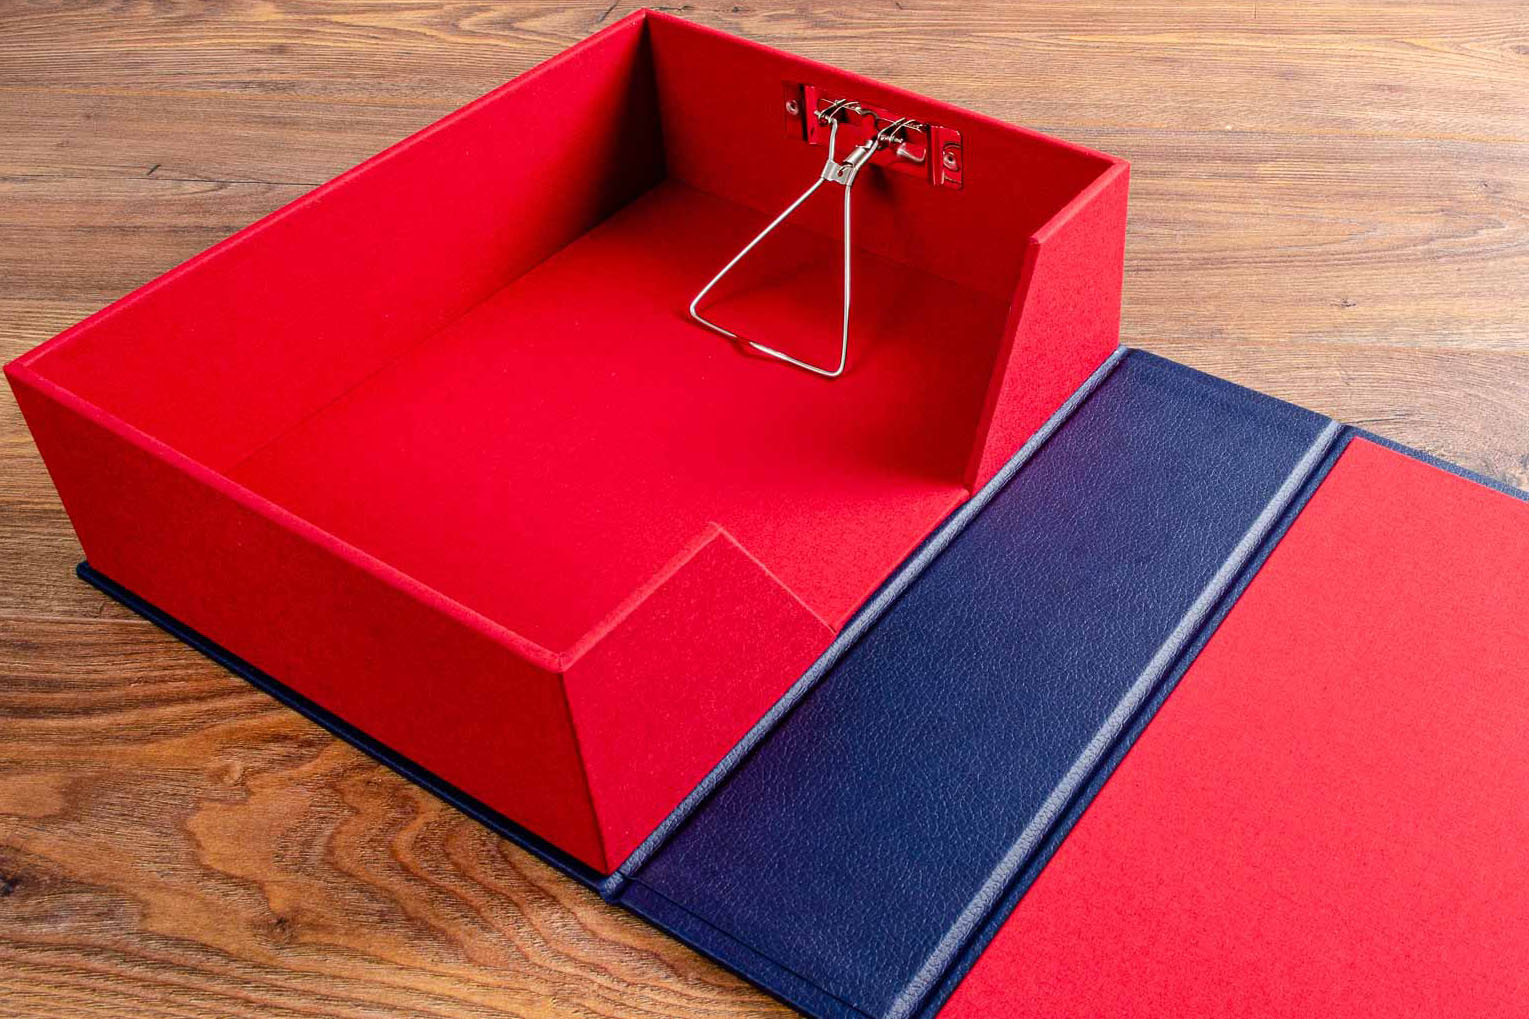 Customised box binder with navy leather wrap